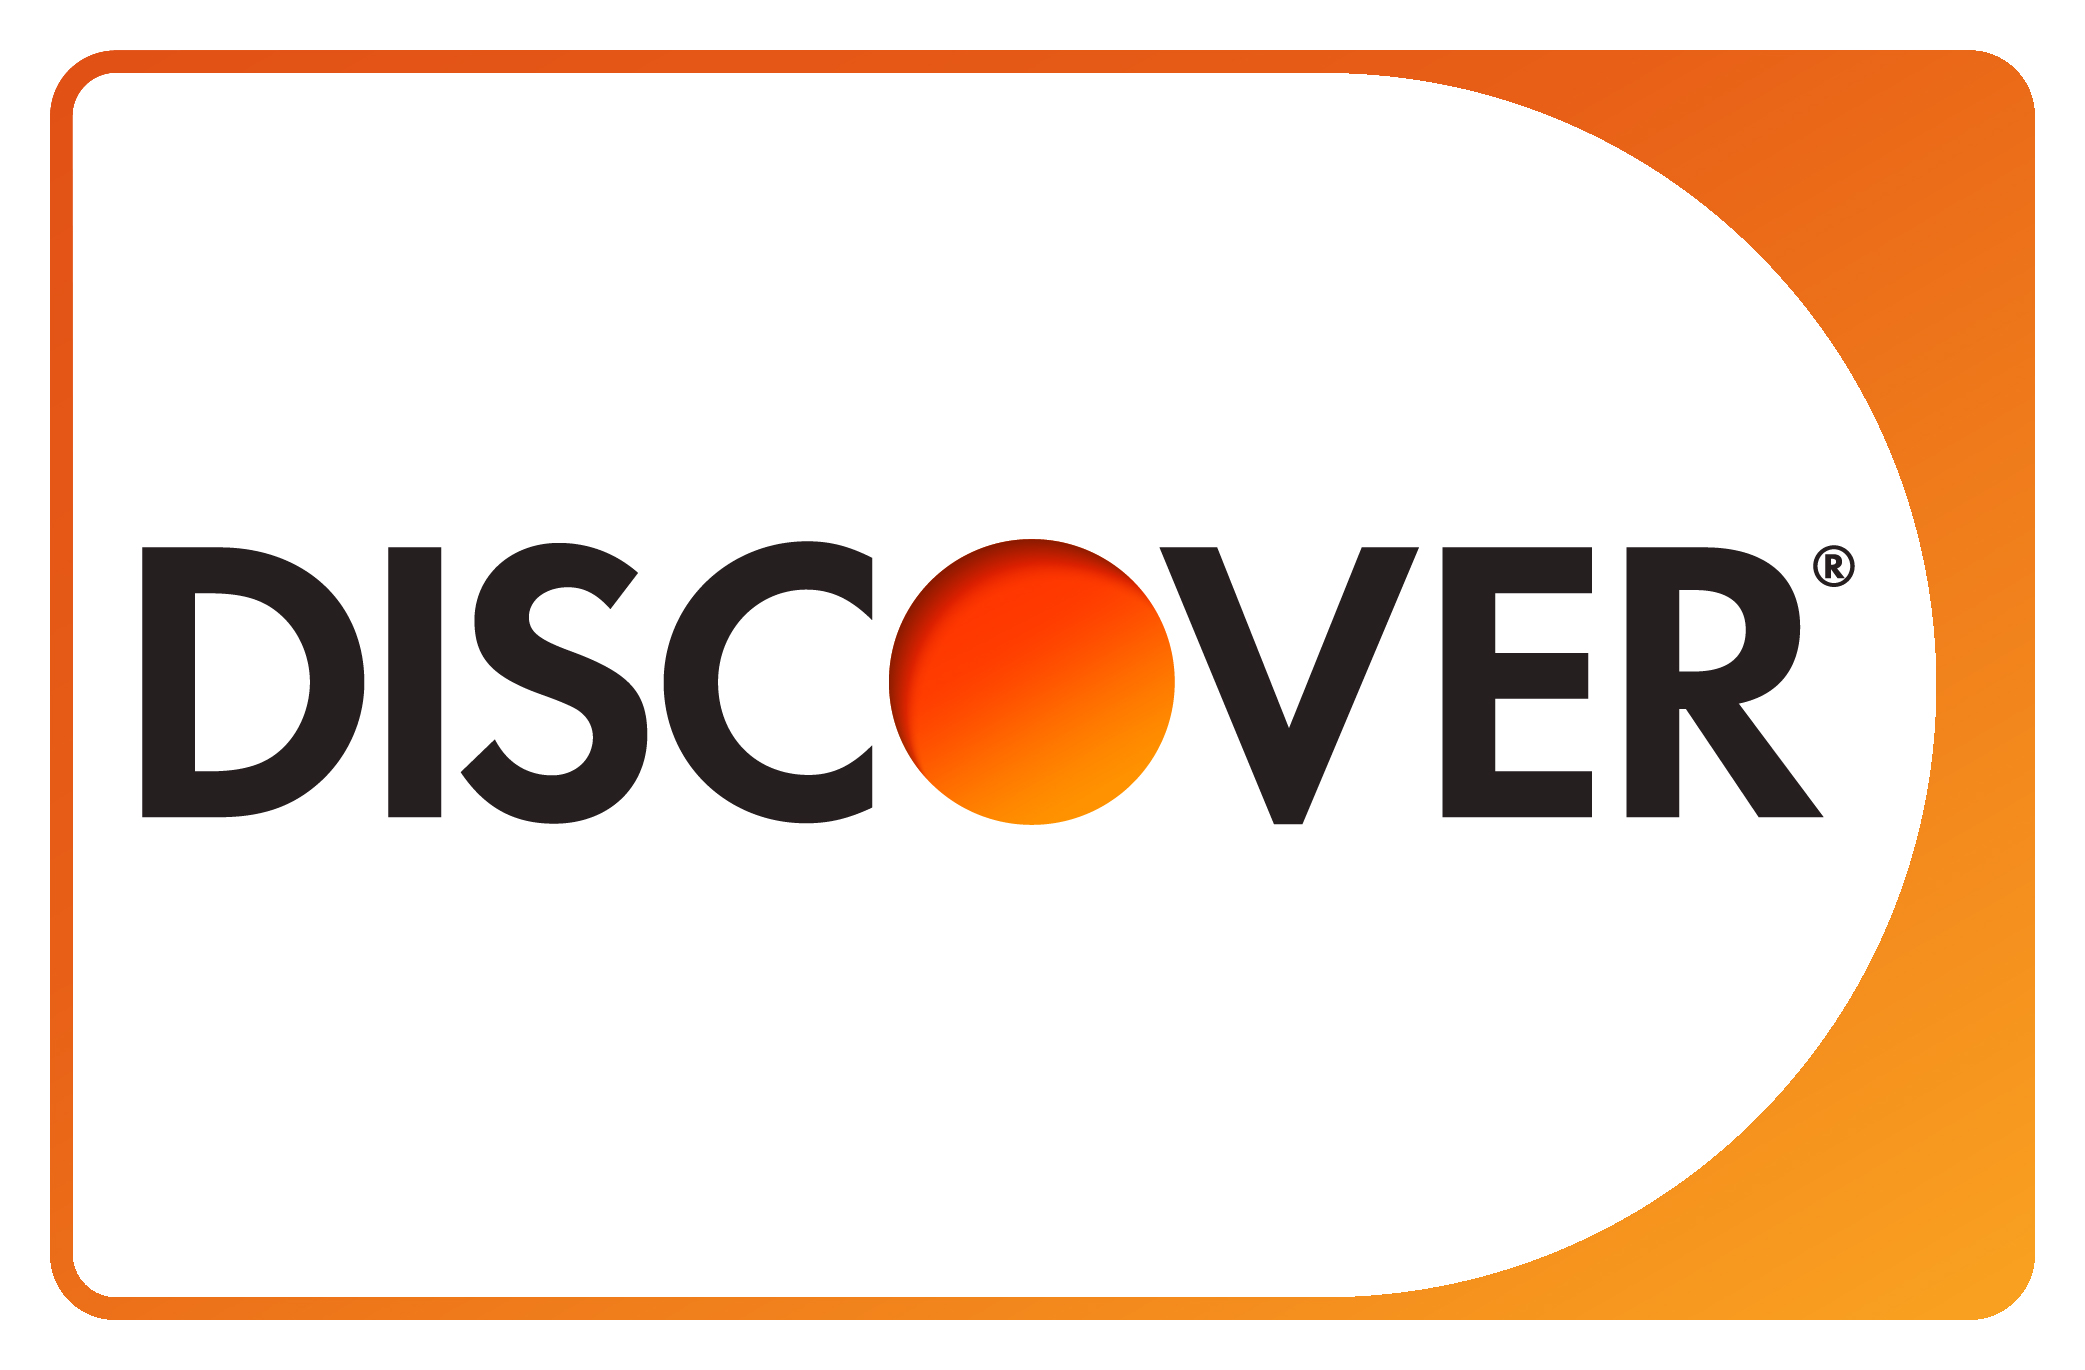 Discover global network Brand Guidelines logo